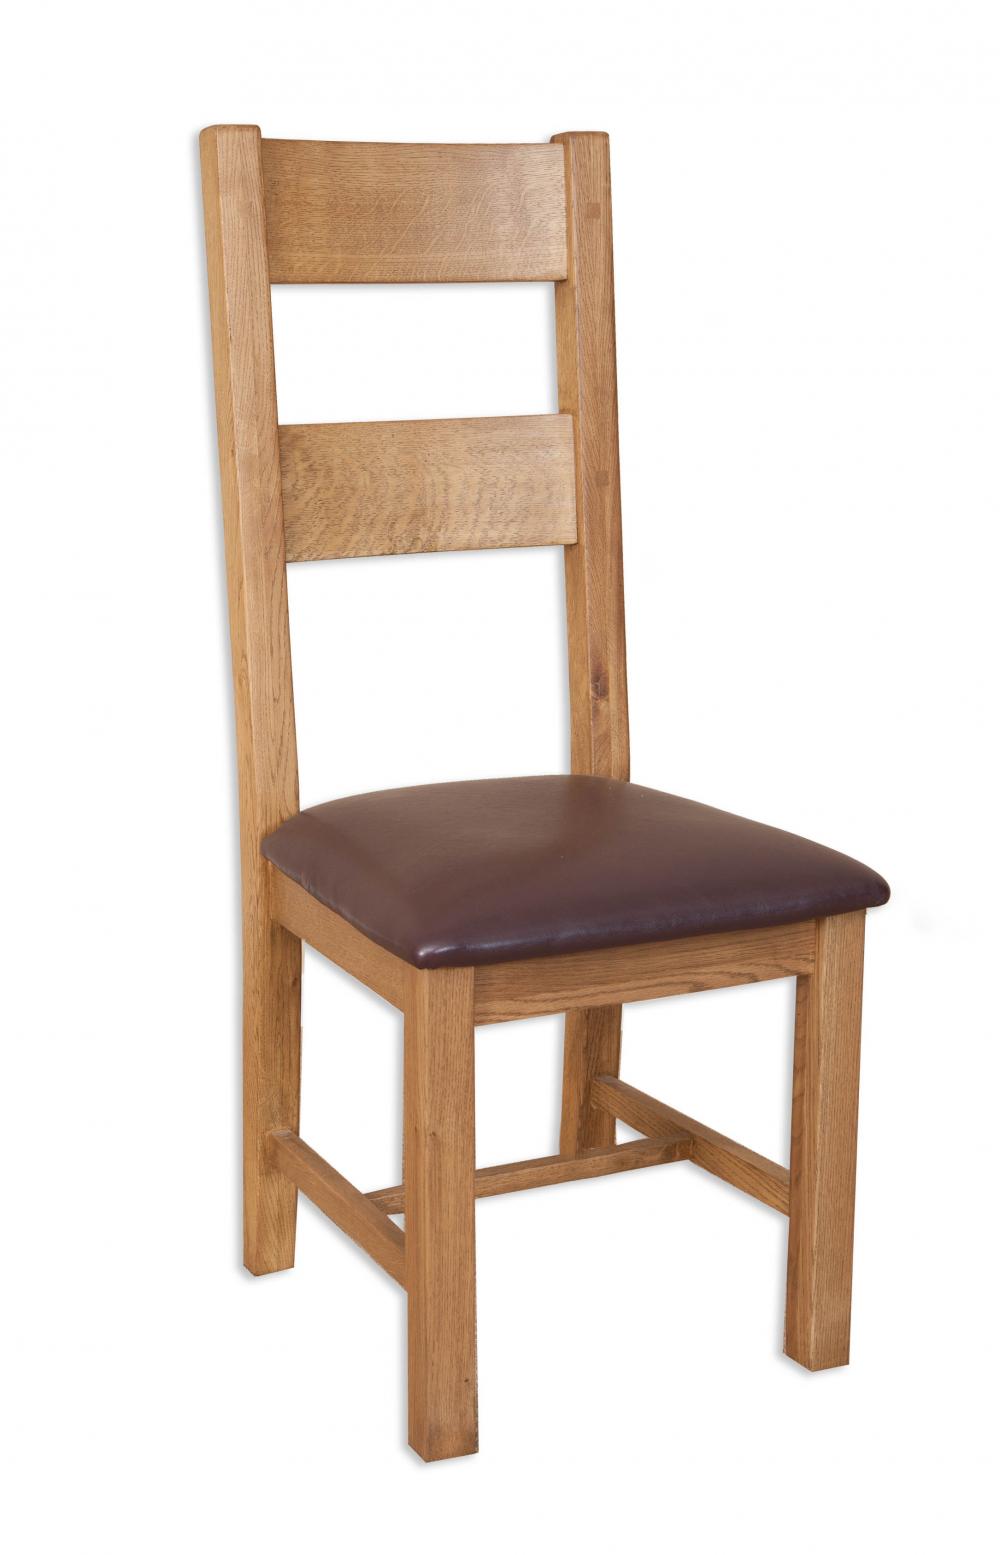 Country Oak Dining Chair With Padded Seat £179